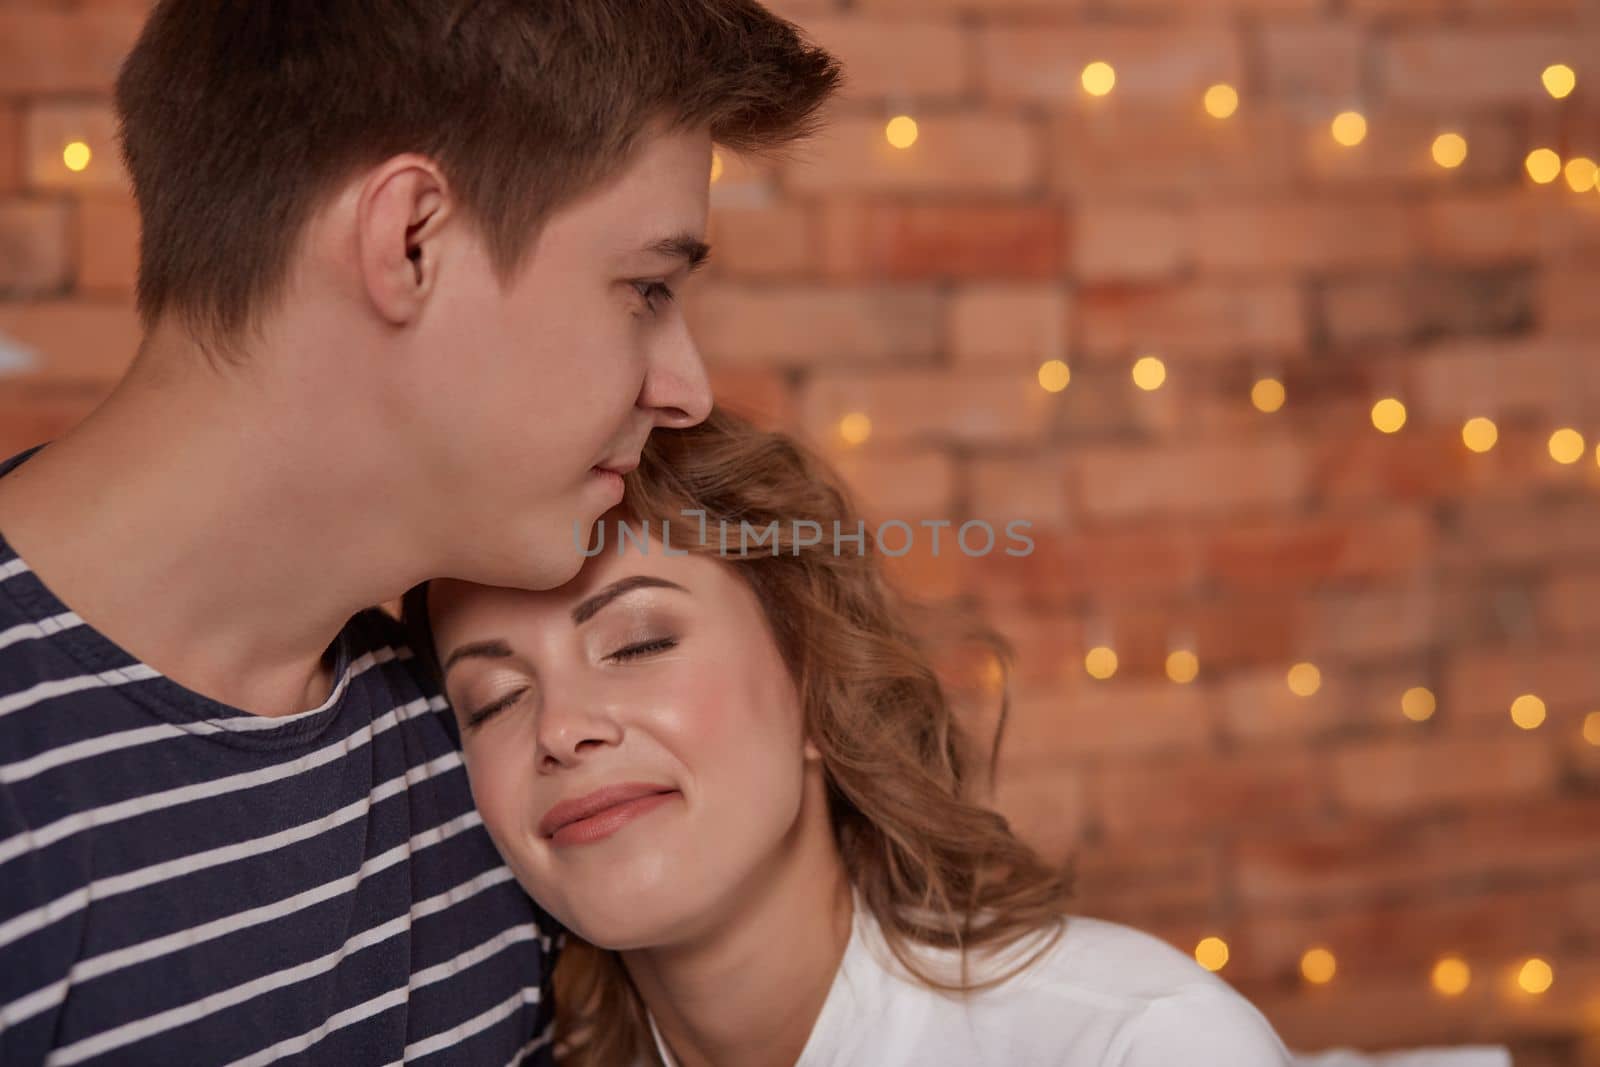 Relation emotions. Young man embracing attractive brunette wife indoor. They are in love and happy